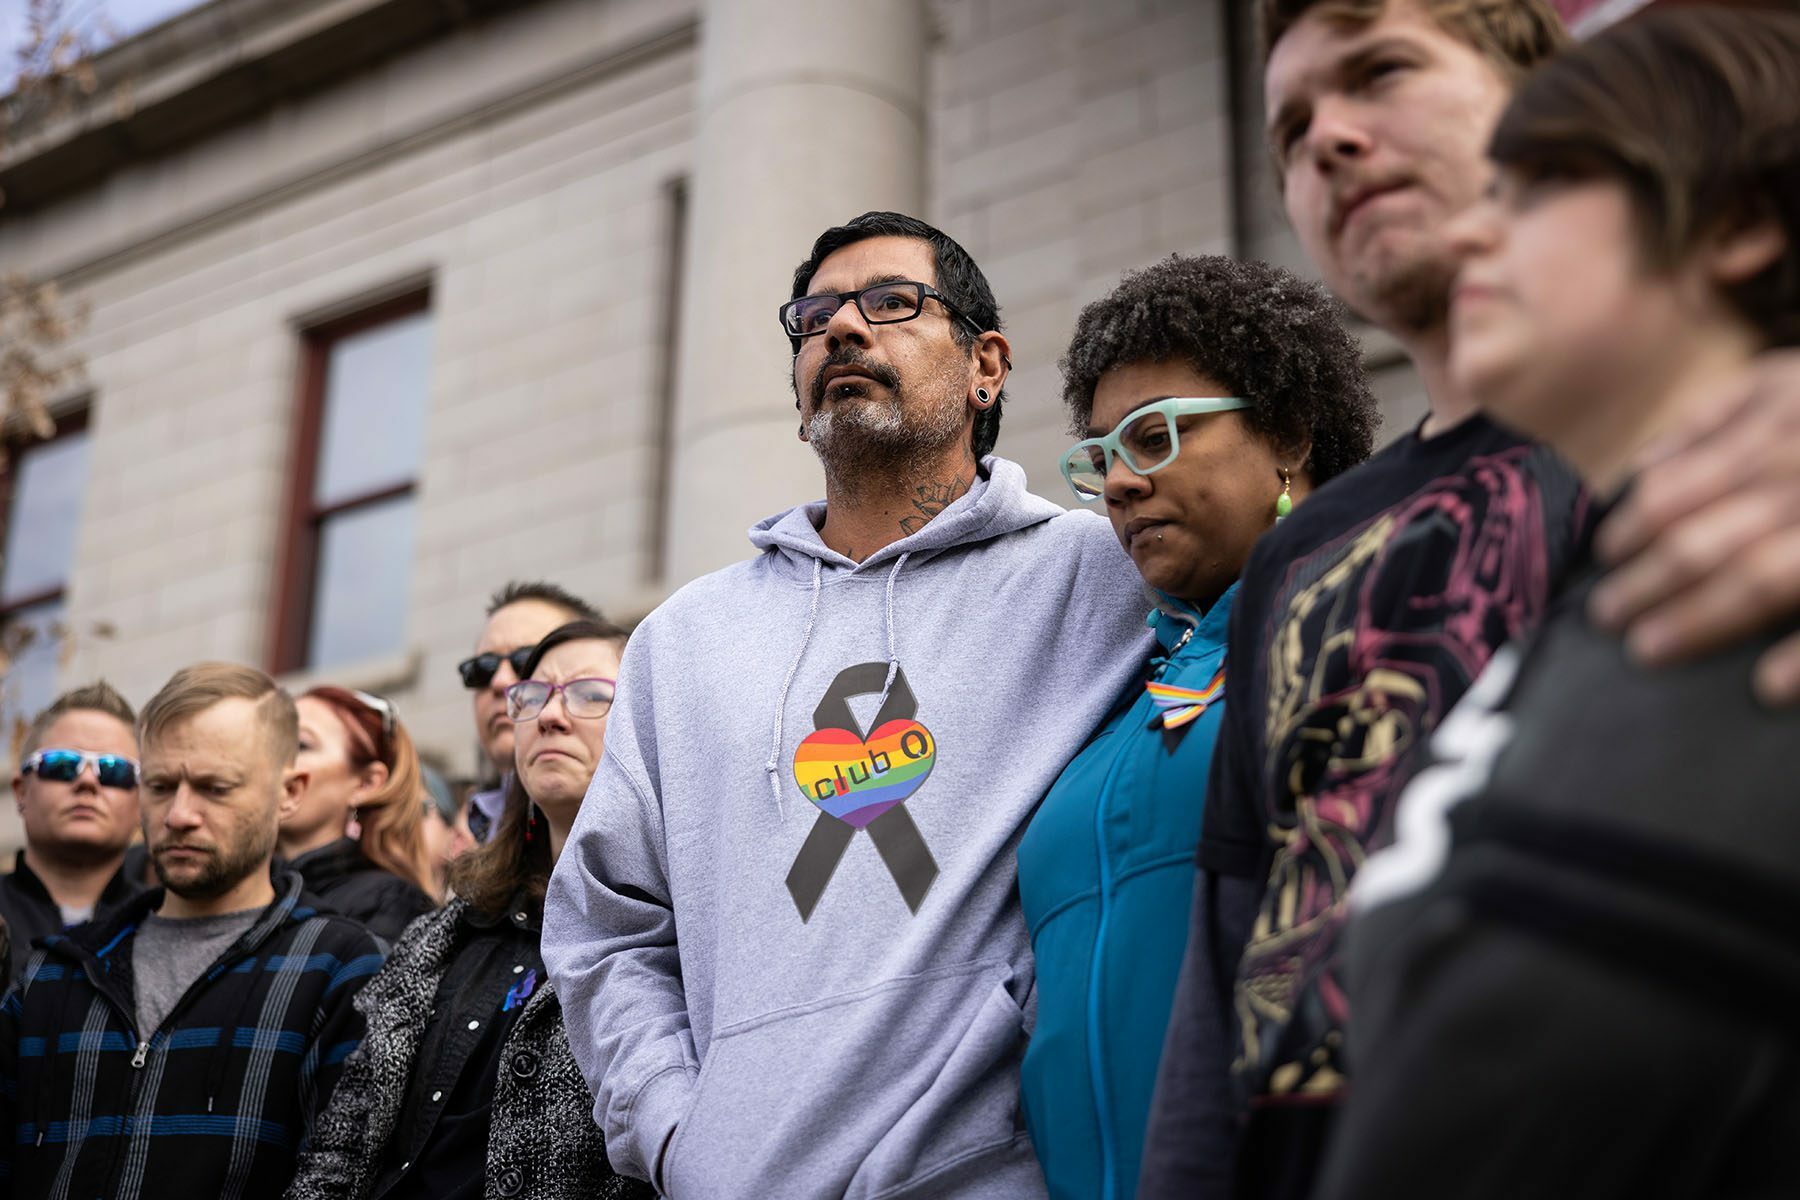 Mourners outside of the Colorado Springs City Hall where a rainbow flag was draped over the building.